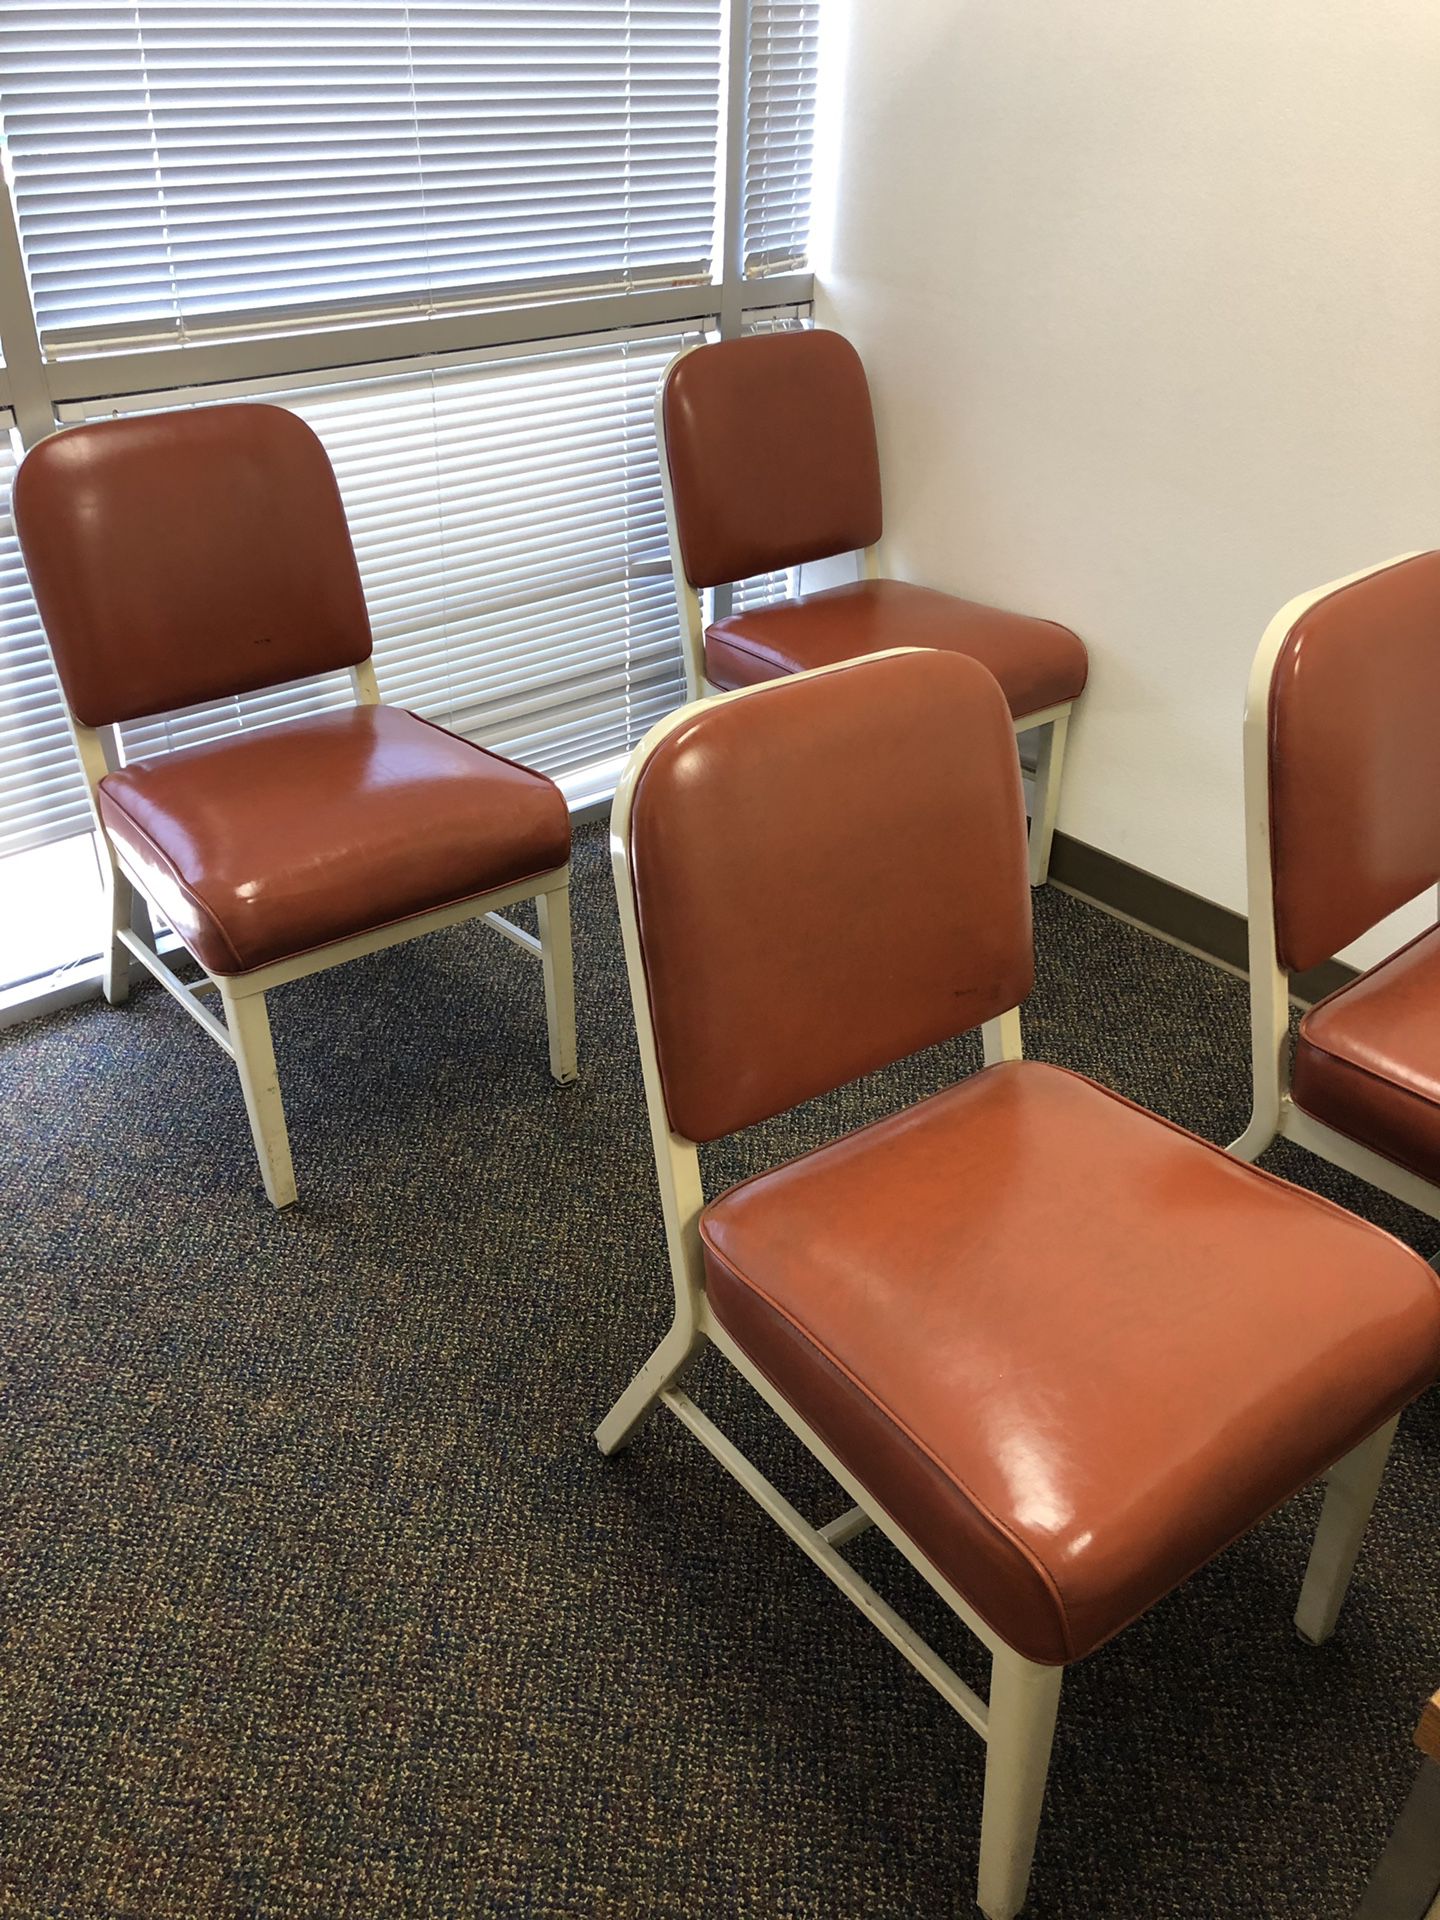 Old office chairs-Ventura area